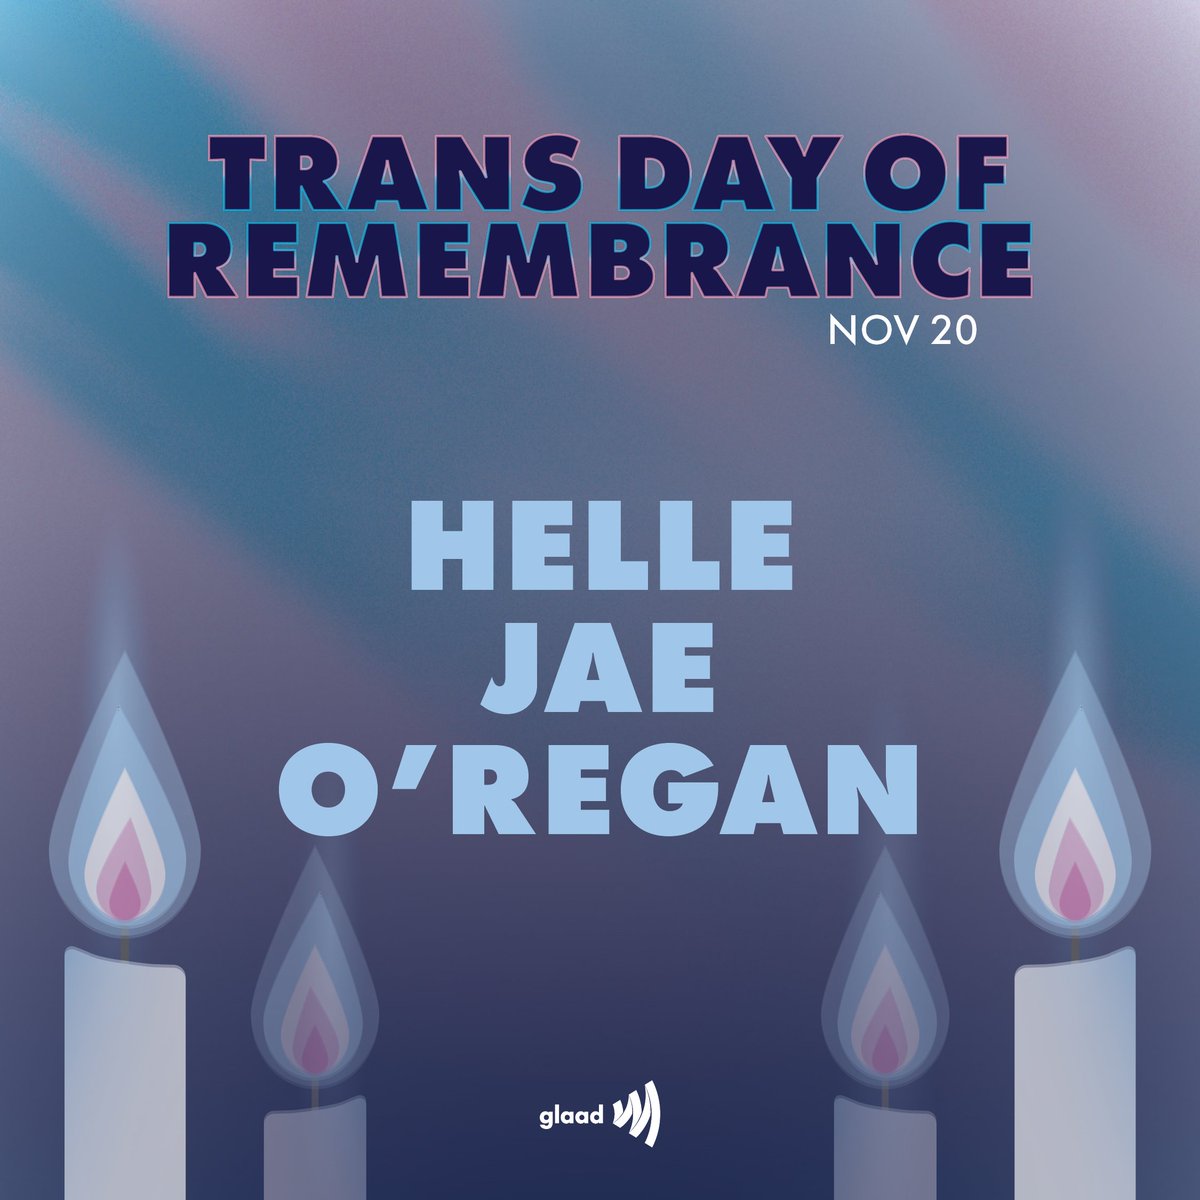 Helle Jae O’Regan, a transgender woman, was killed in San Antonio, Texas on May 6, 2020. She was 20 years old. She was an outspoken about injustice and the prison industrial complex, as well as speaking up about decriminalizing sex work.